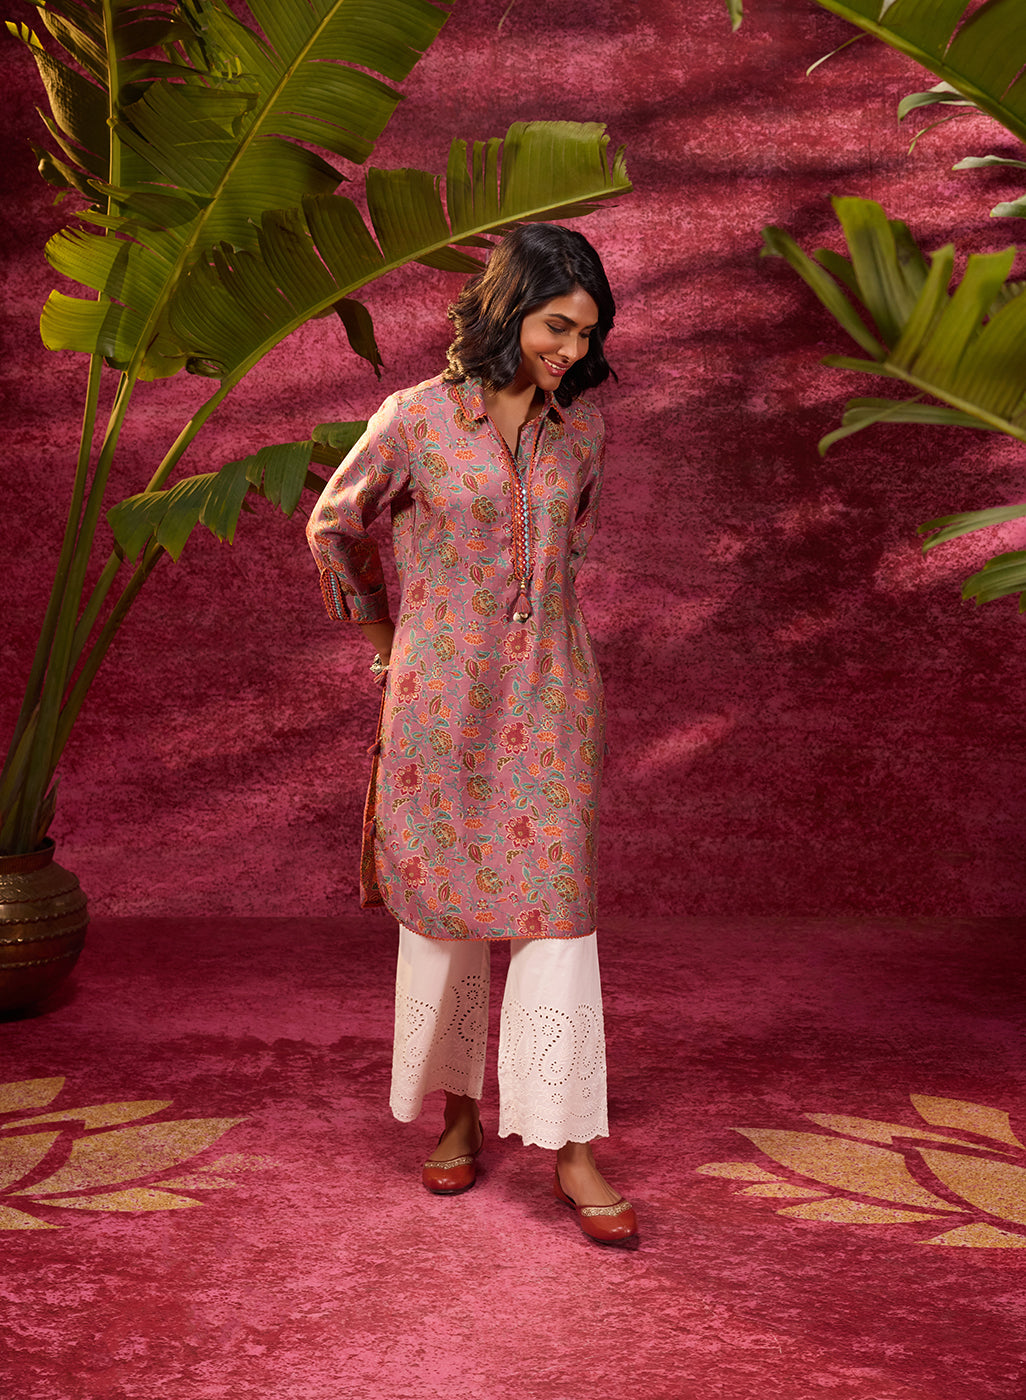 Noor Turkish Rose Pink Printed Cotton Tunic paired with white palazzo